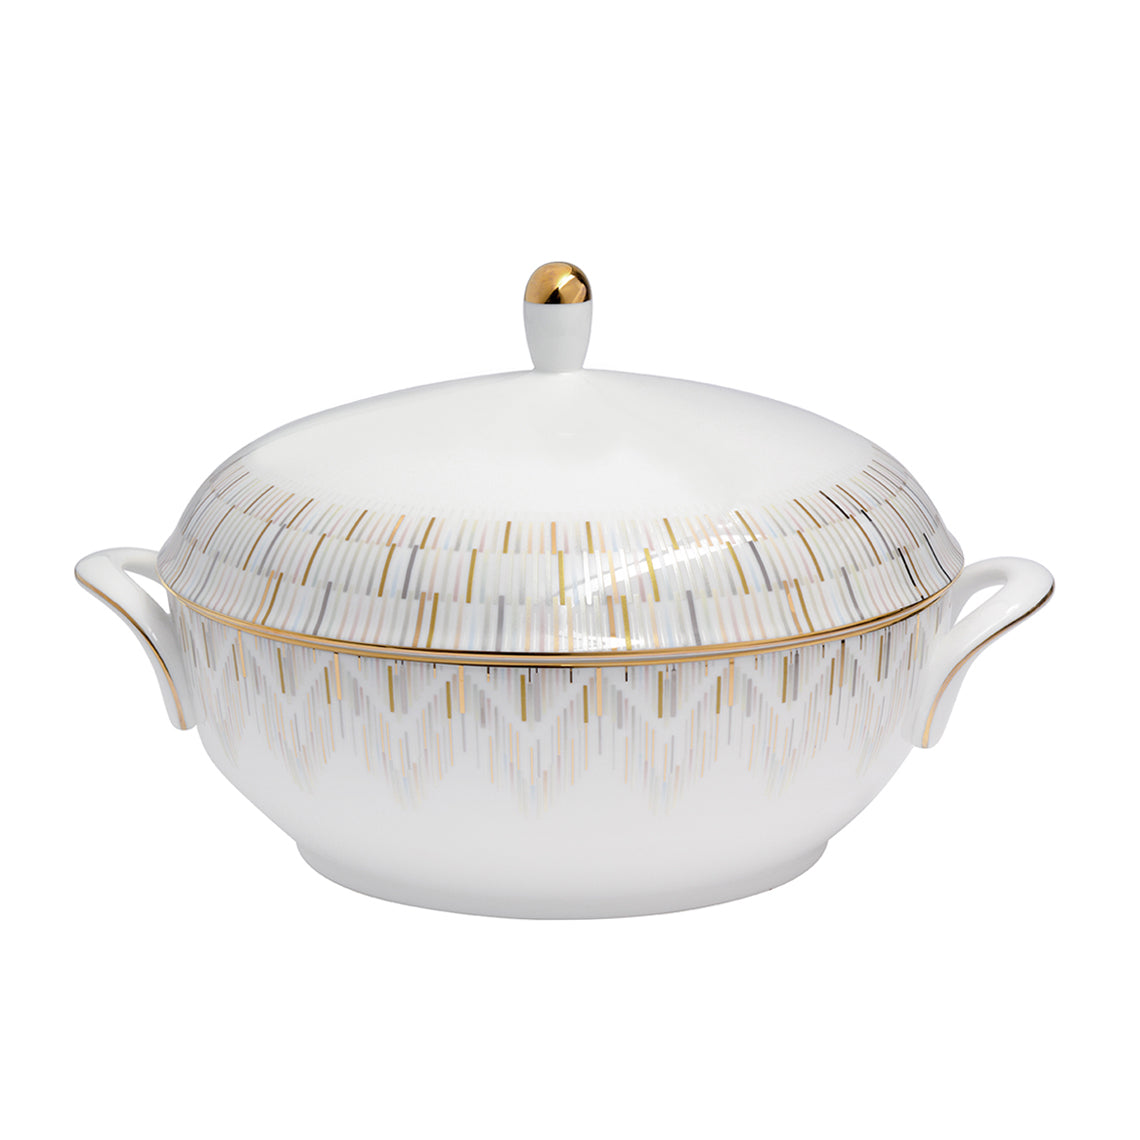 Luminous Soup Tureen / Covered Serving Bowl White Background Photo